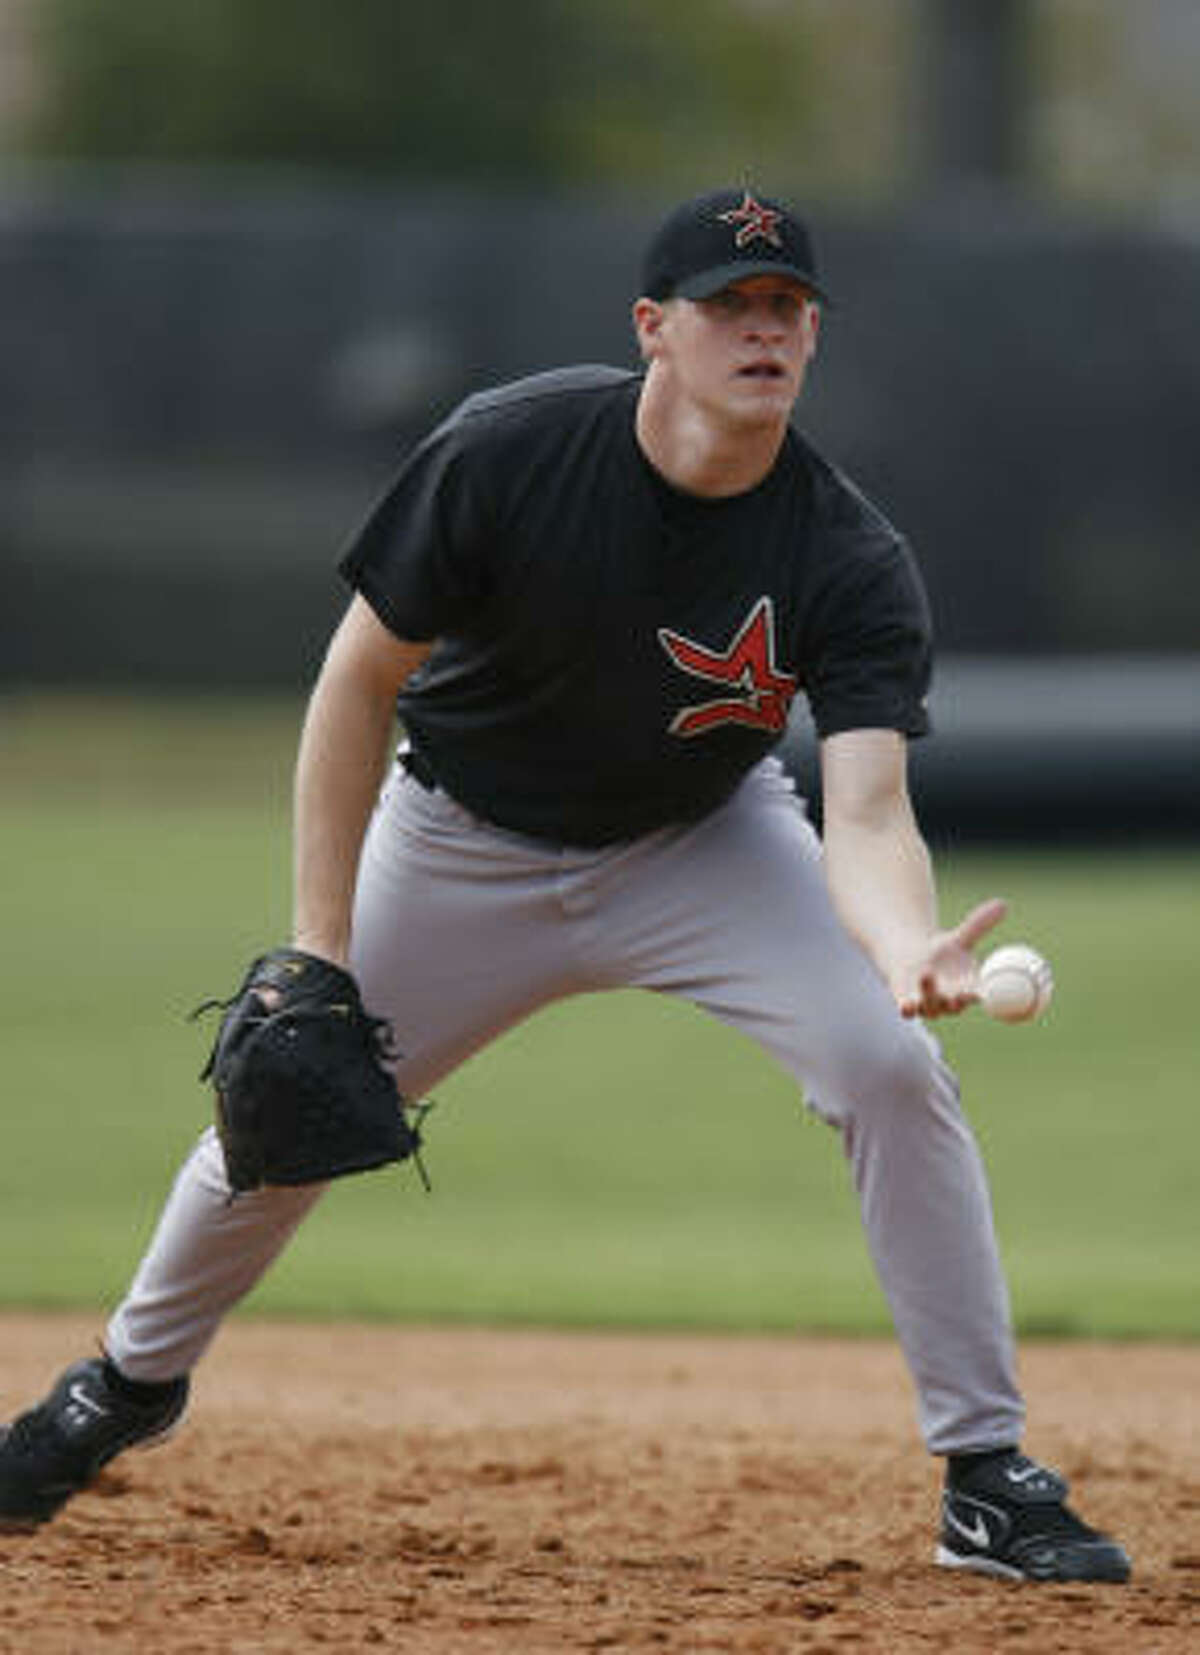 Troy Patton was included in the deal with the Baltimore Orioles that brought Miguel Tejada.